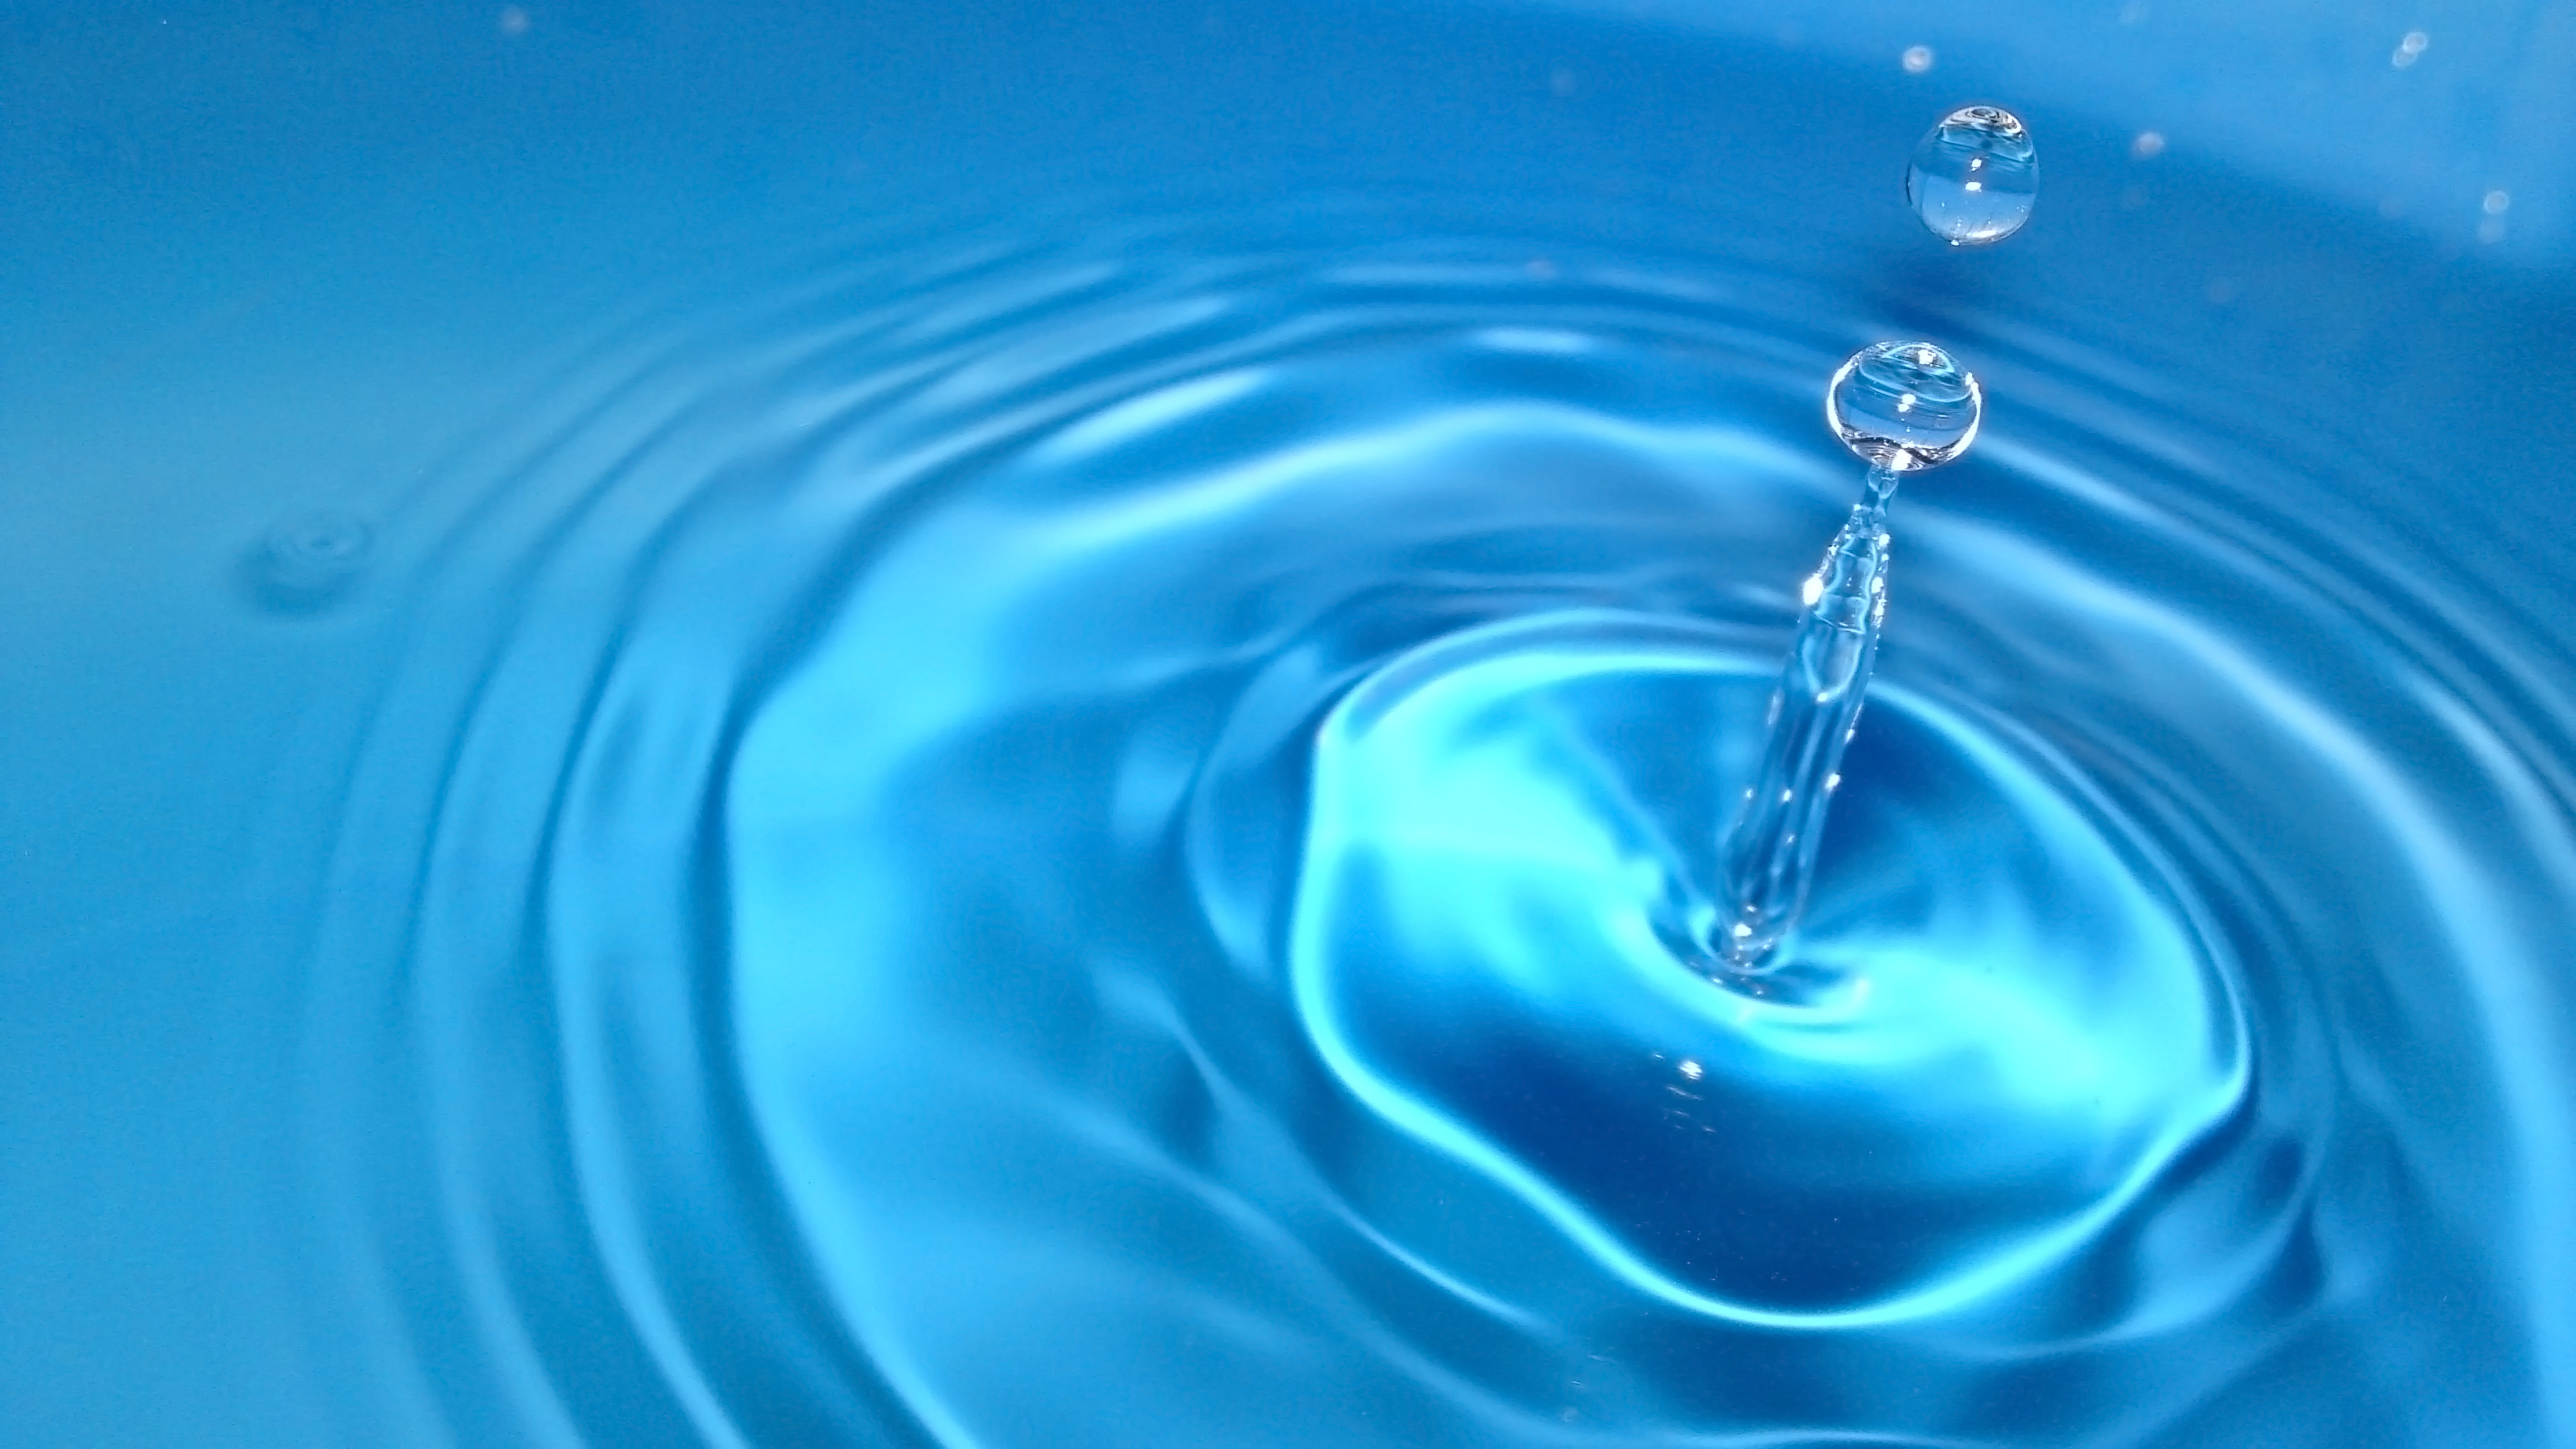 Water Drops 4k Ultra HD Wallpaper and Background